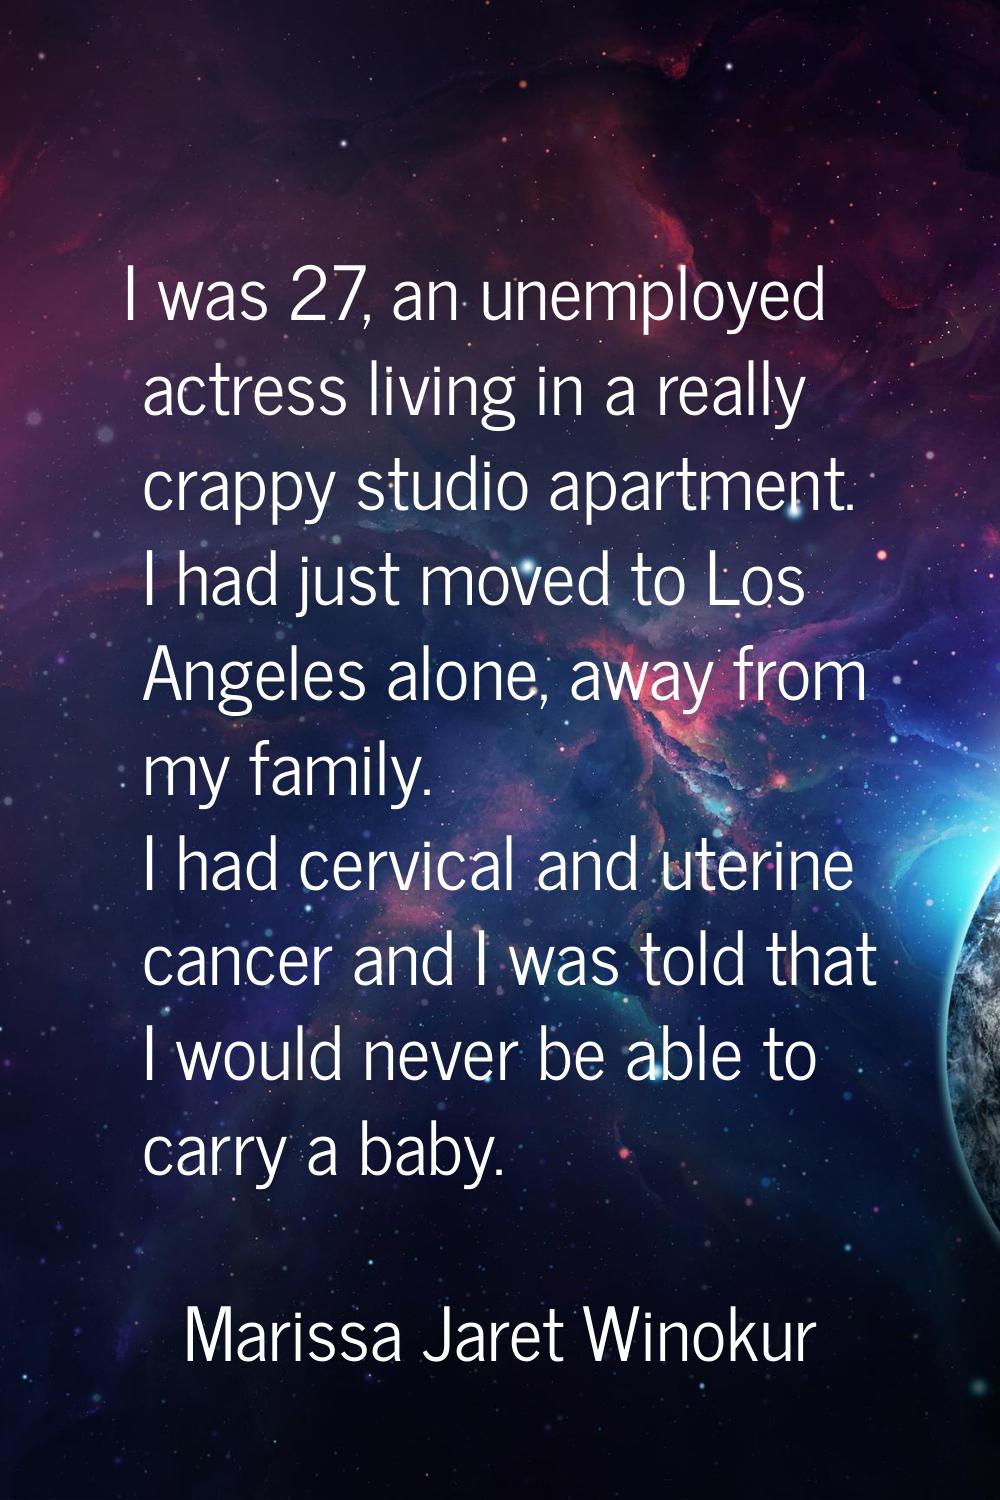 I was 27, an unemployed actress living in a really crappy studio apartment. I had just moved to Los